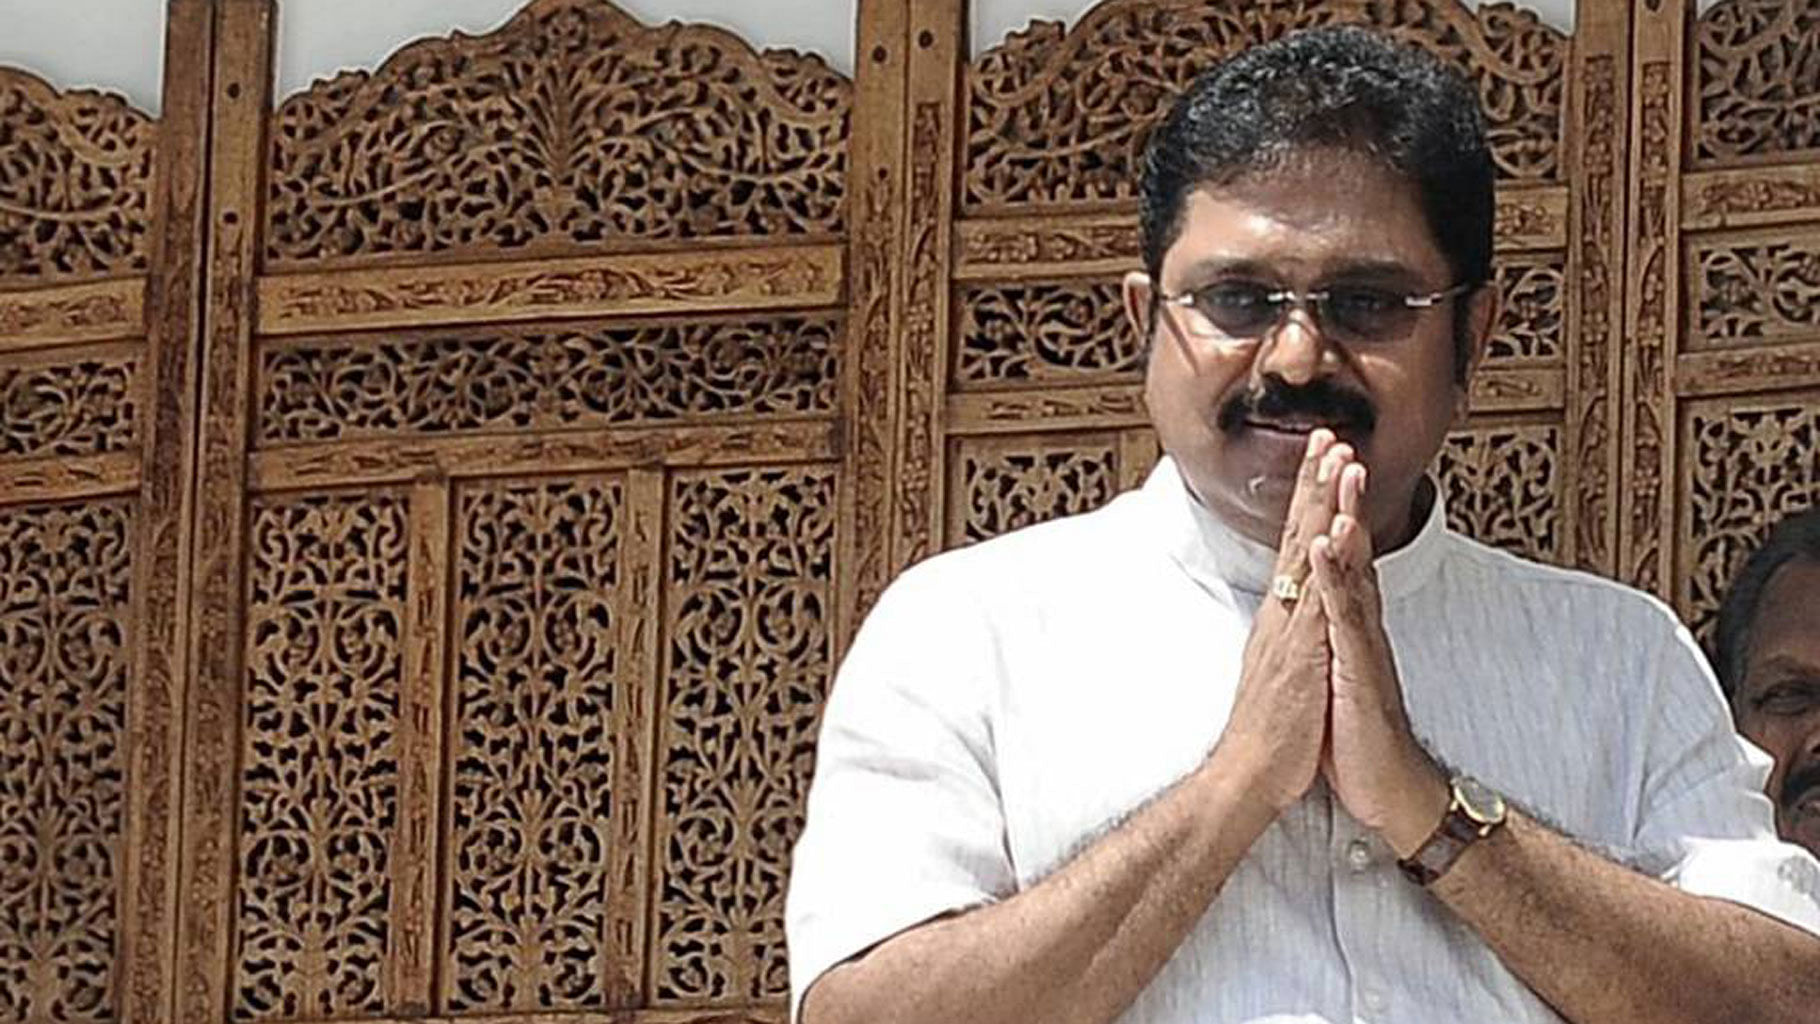 Dhinakaran assailed Chief Minister Edappadi K Palaniswami for betraying the confidence of the party leadership.